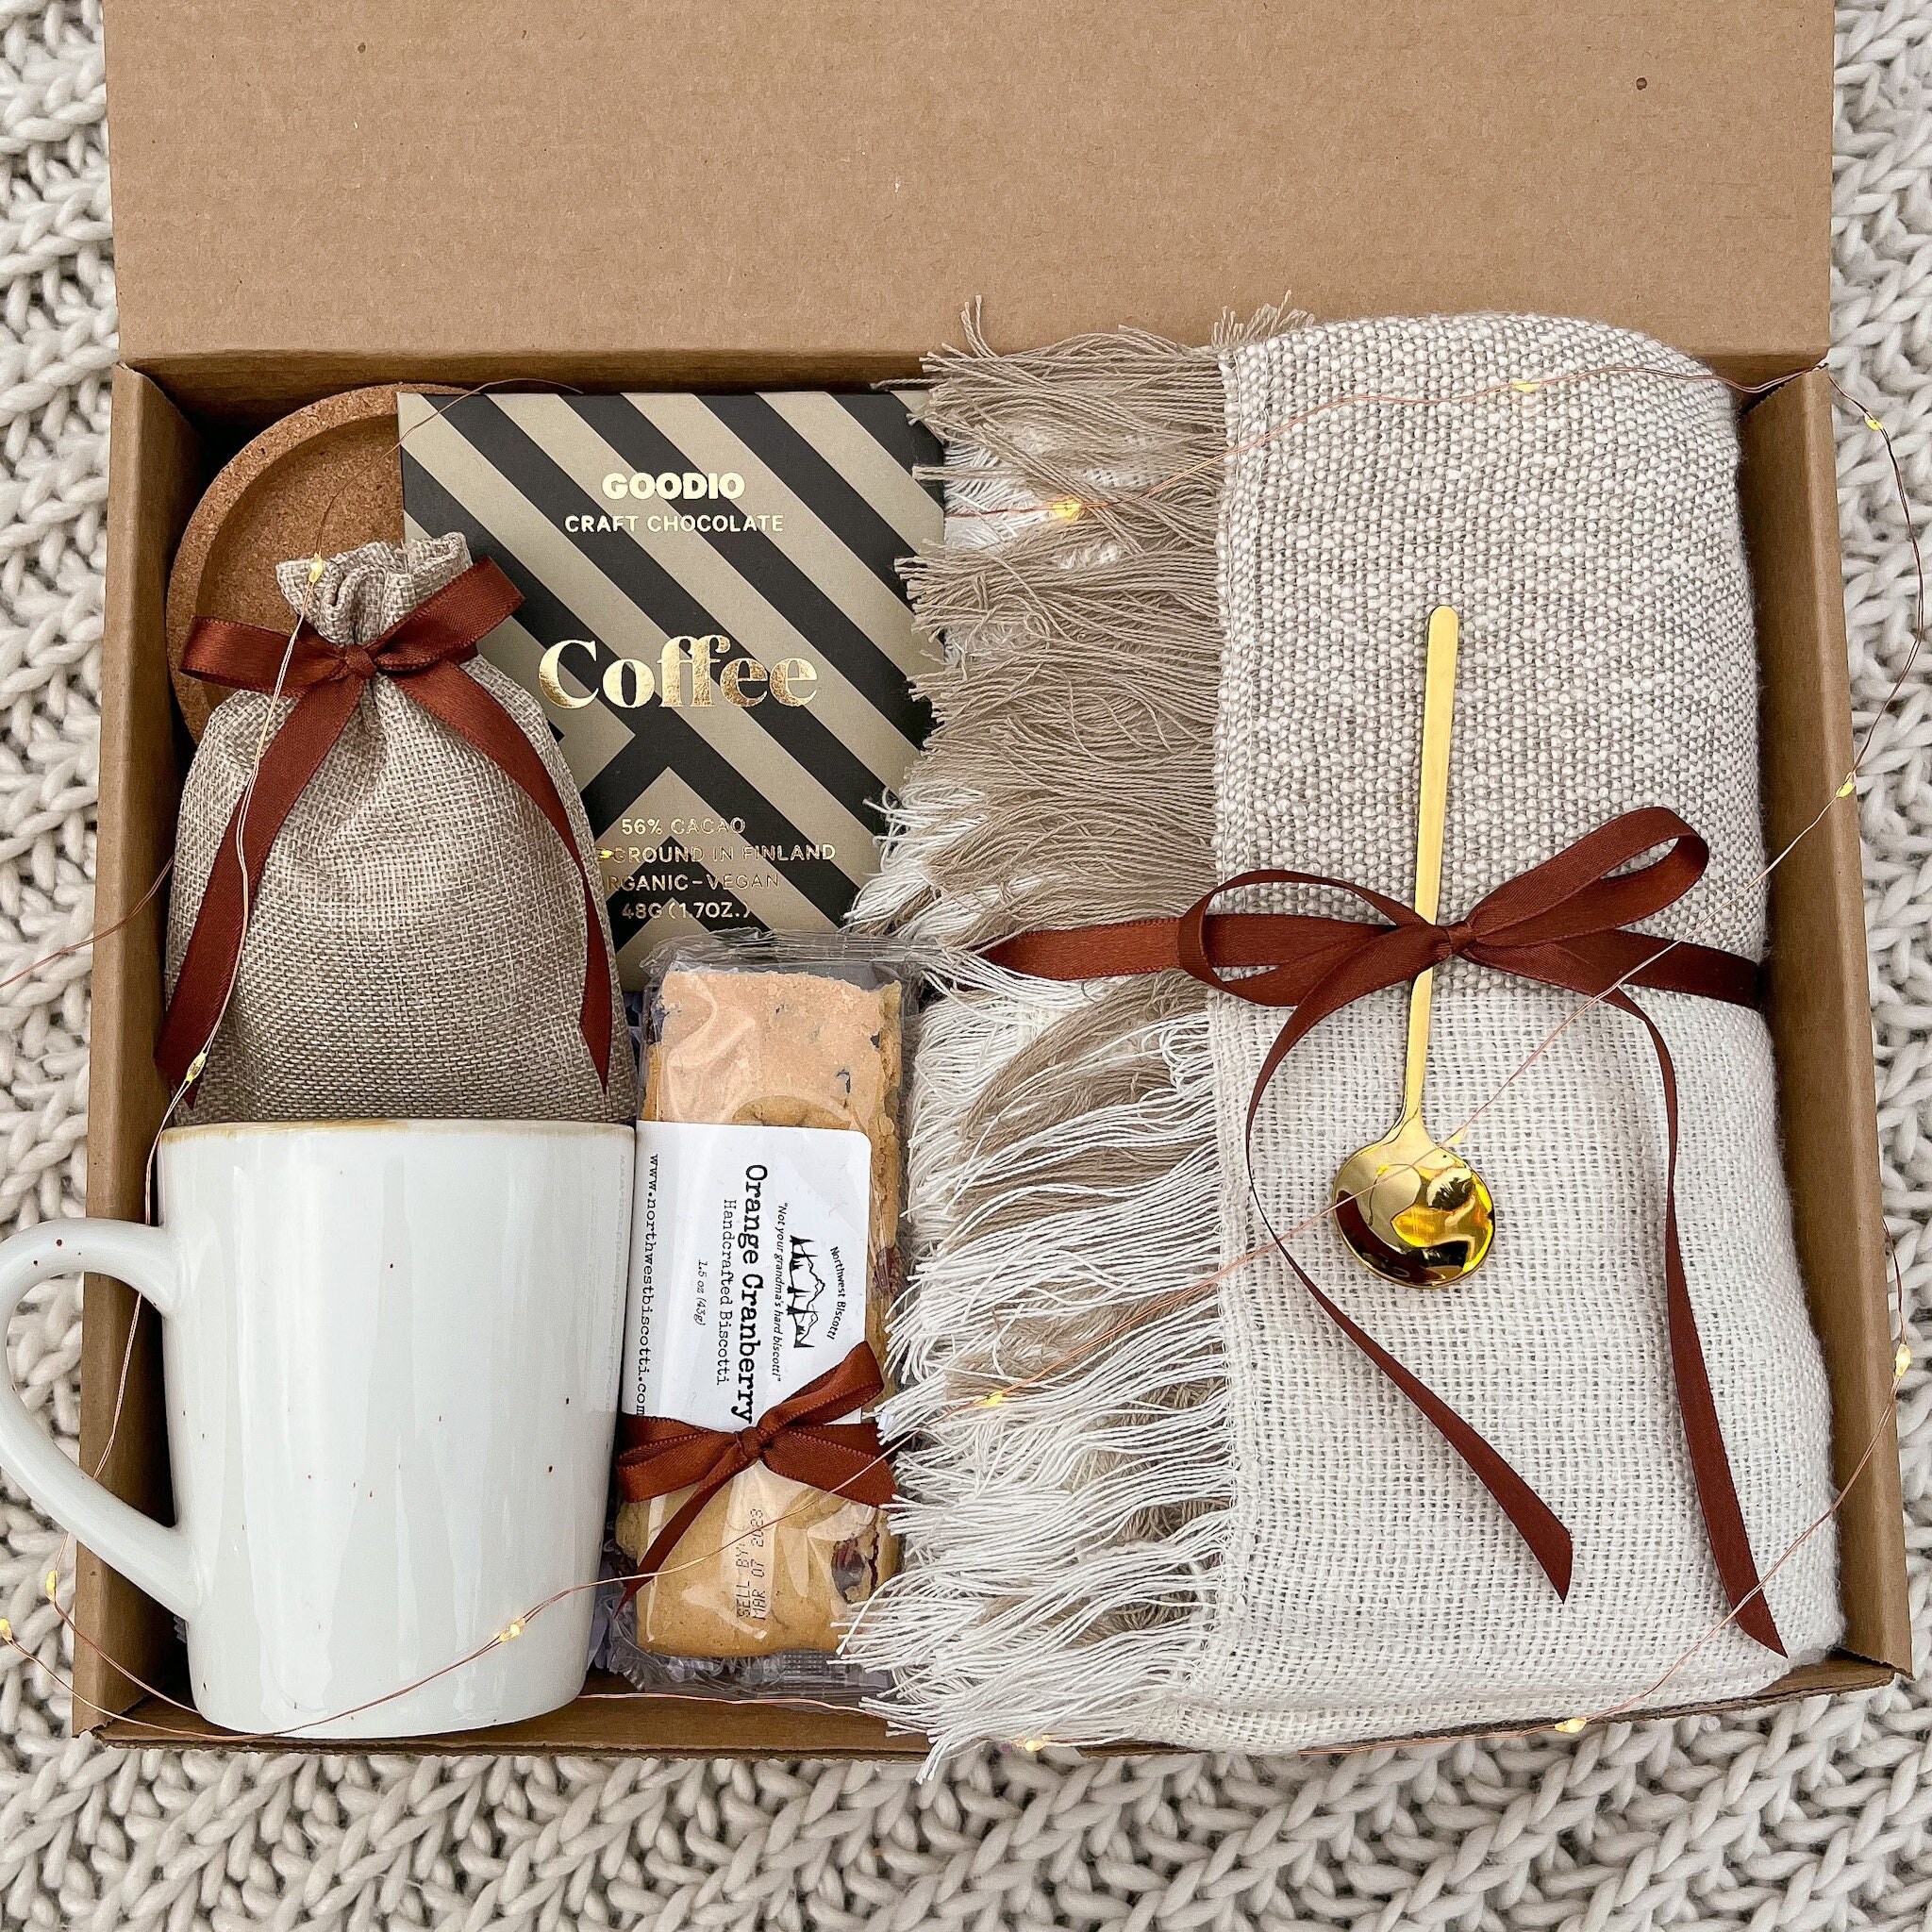 Cozy gift box, Fall gift basket, Hygge gift, Recovery gift, Gift ideas,  Thank you gift, sending a hug, thinking of you, care package, BLK -   Portugal